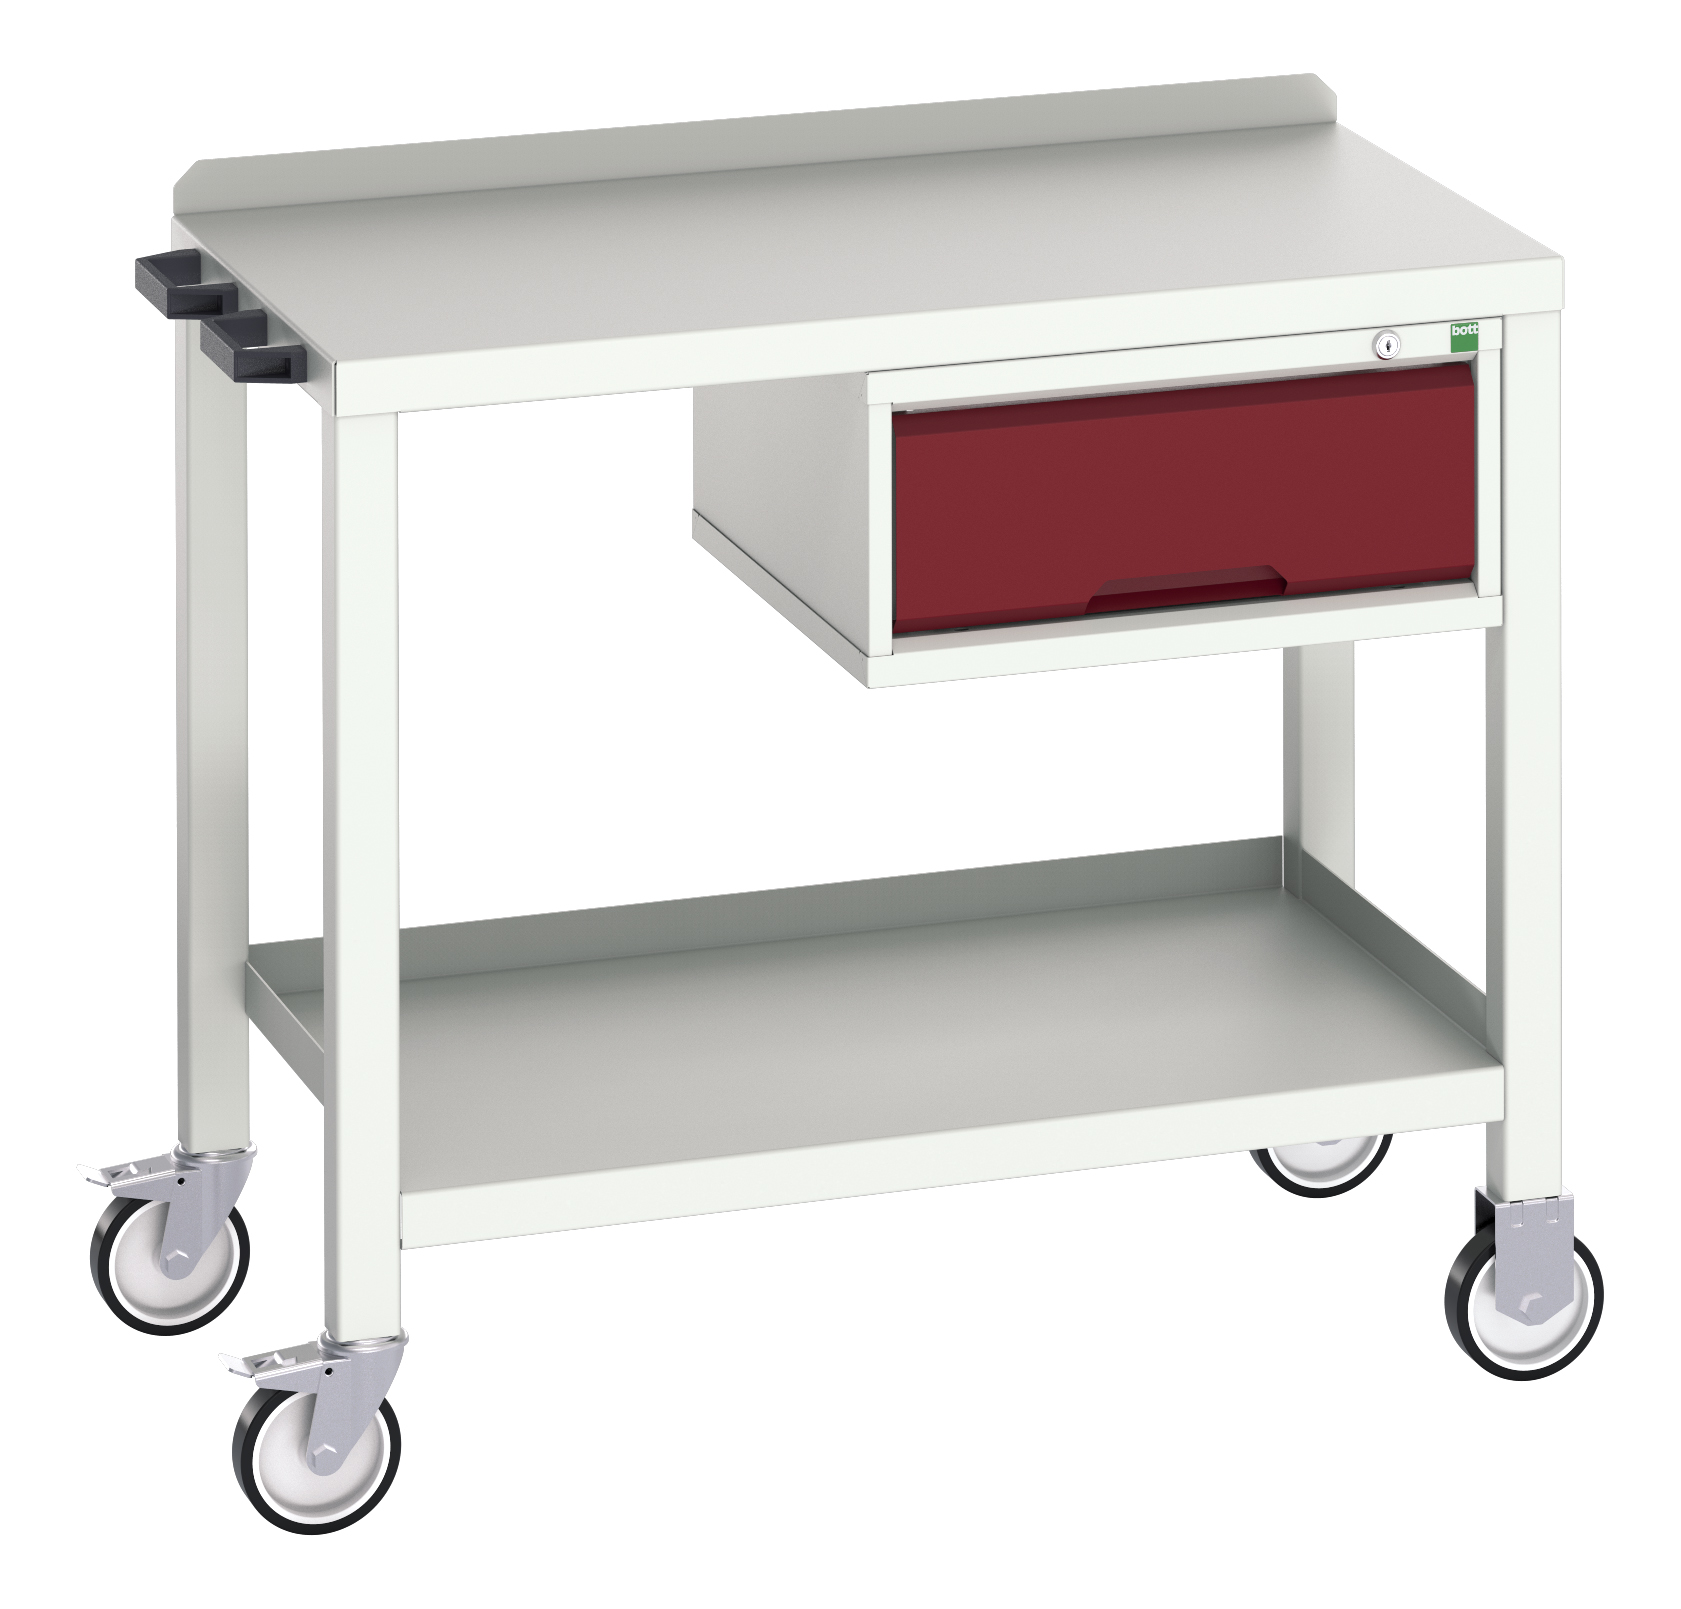 Bott Verso Mobile Welded Bench With 1 Drawer Cabinet - 16922800.24